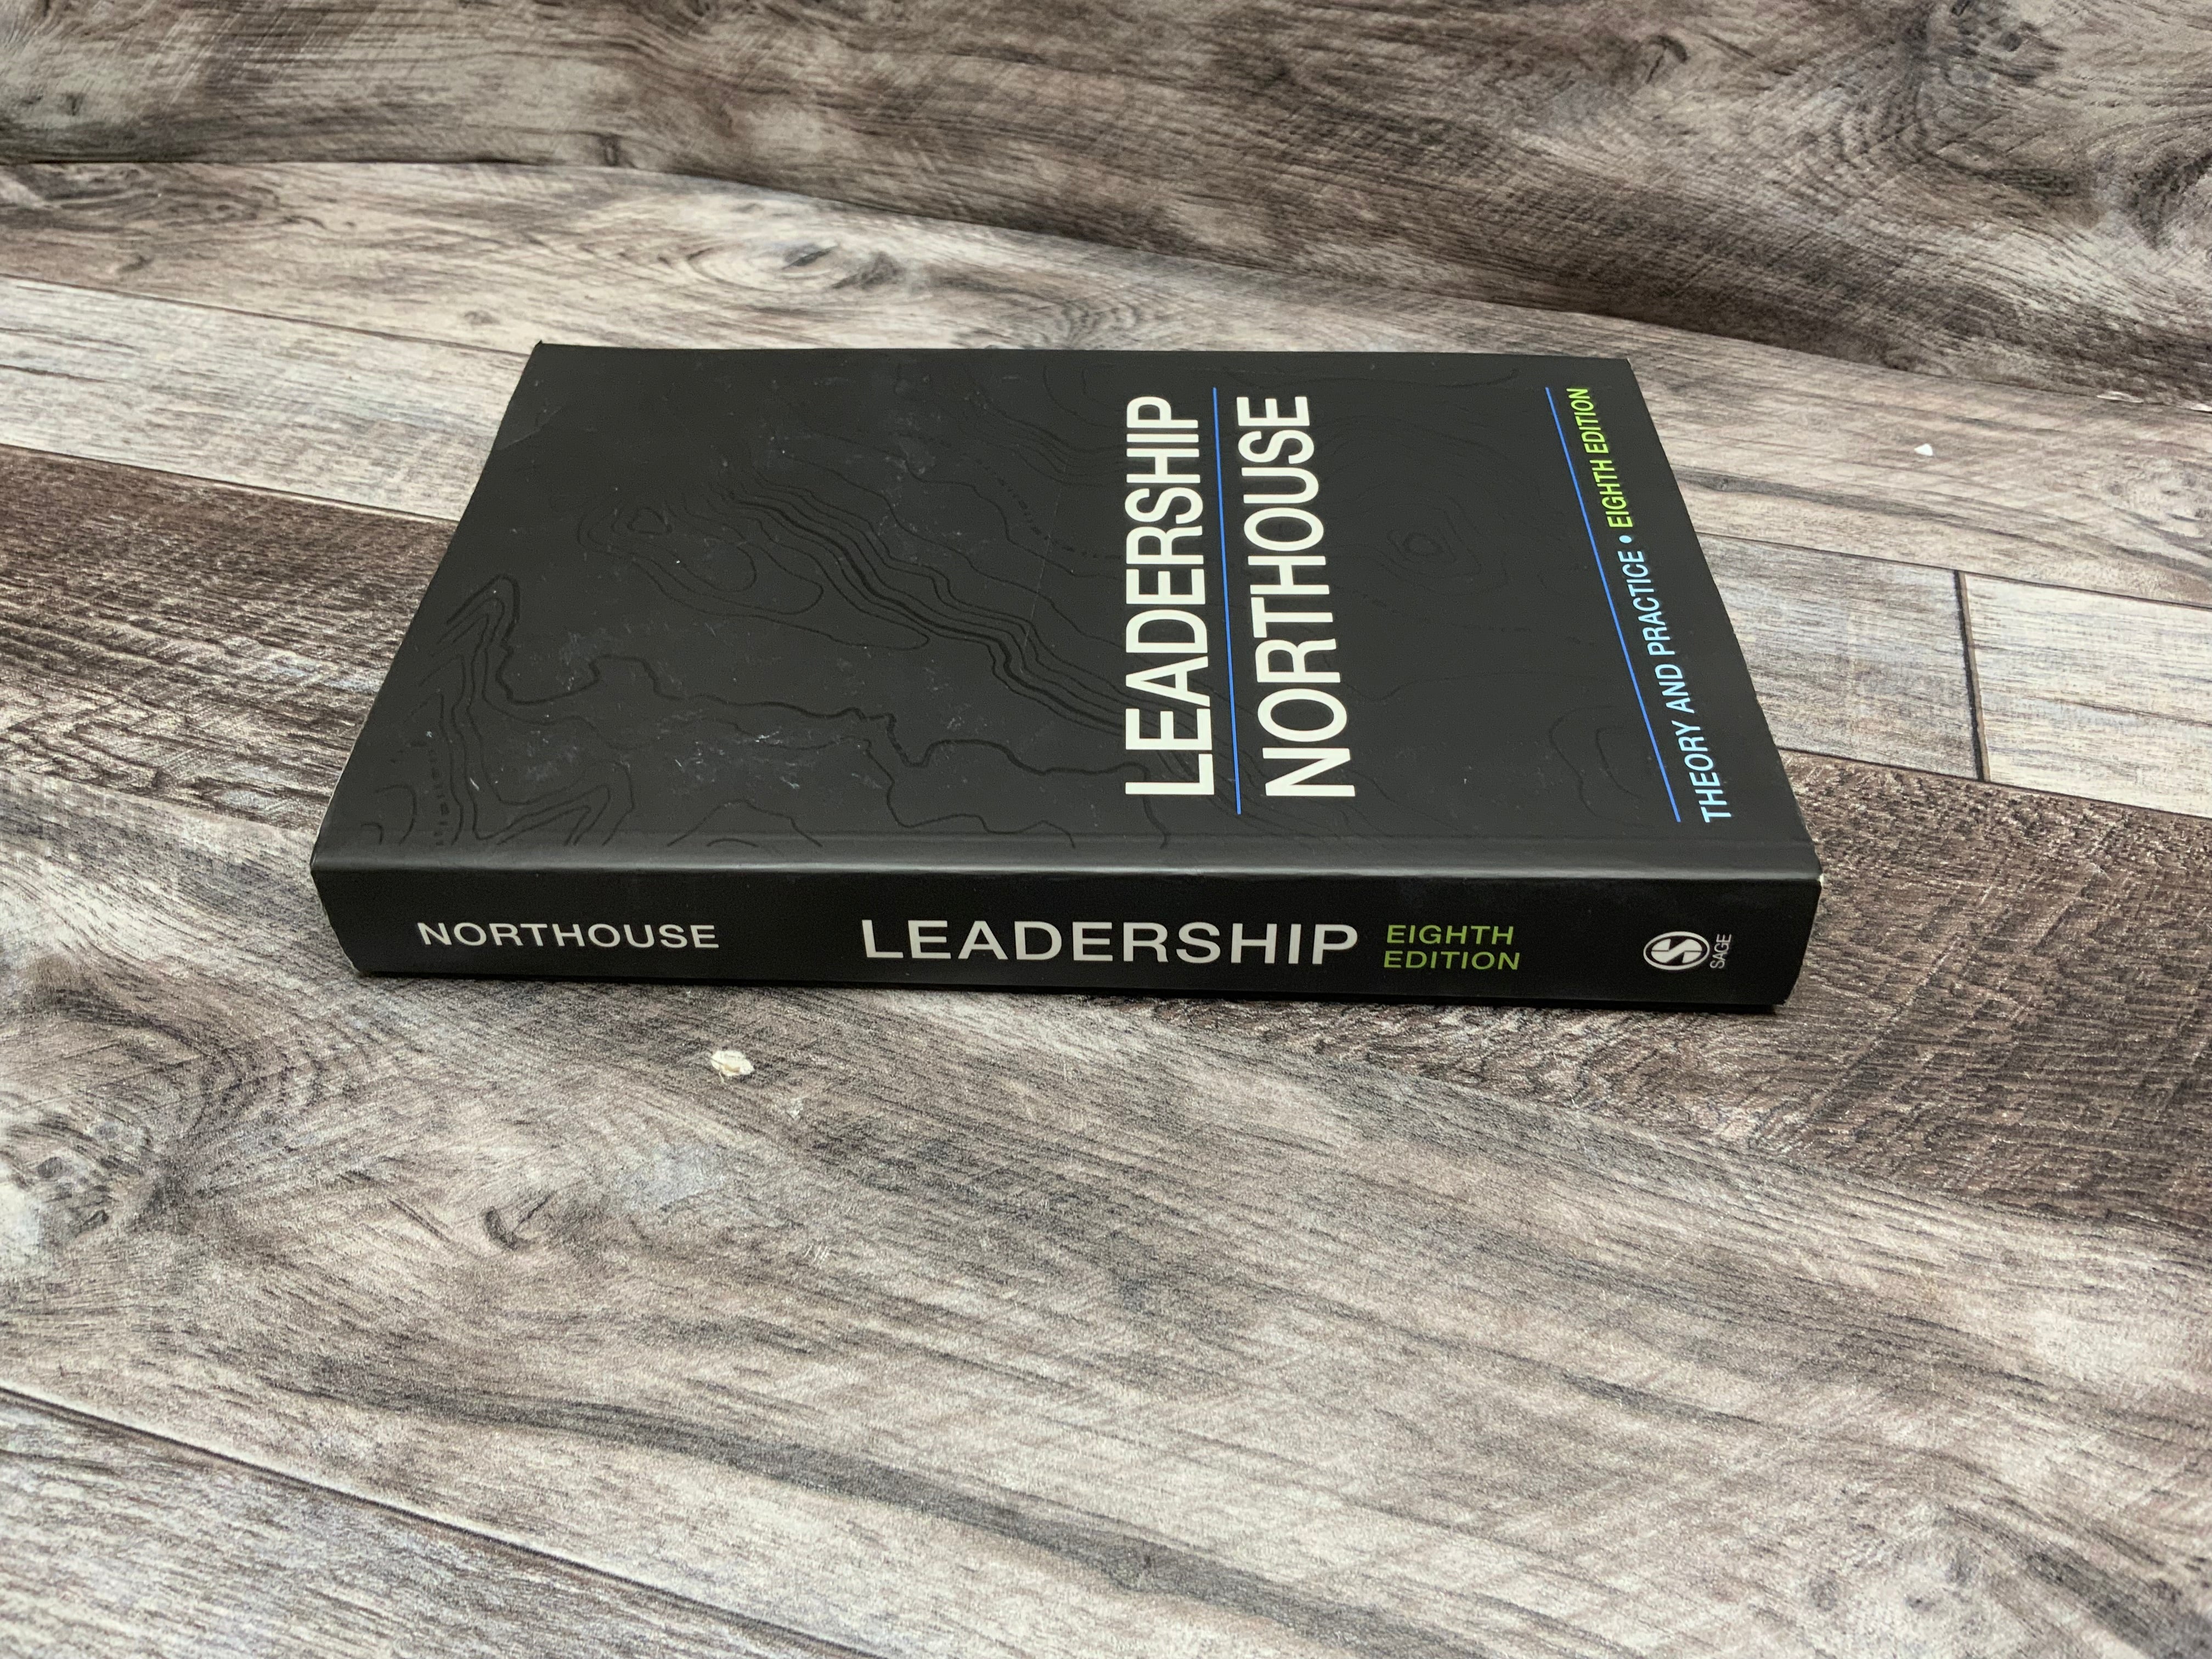 Leadership: Theory and Practice 8th Edition (8198739722478)